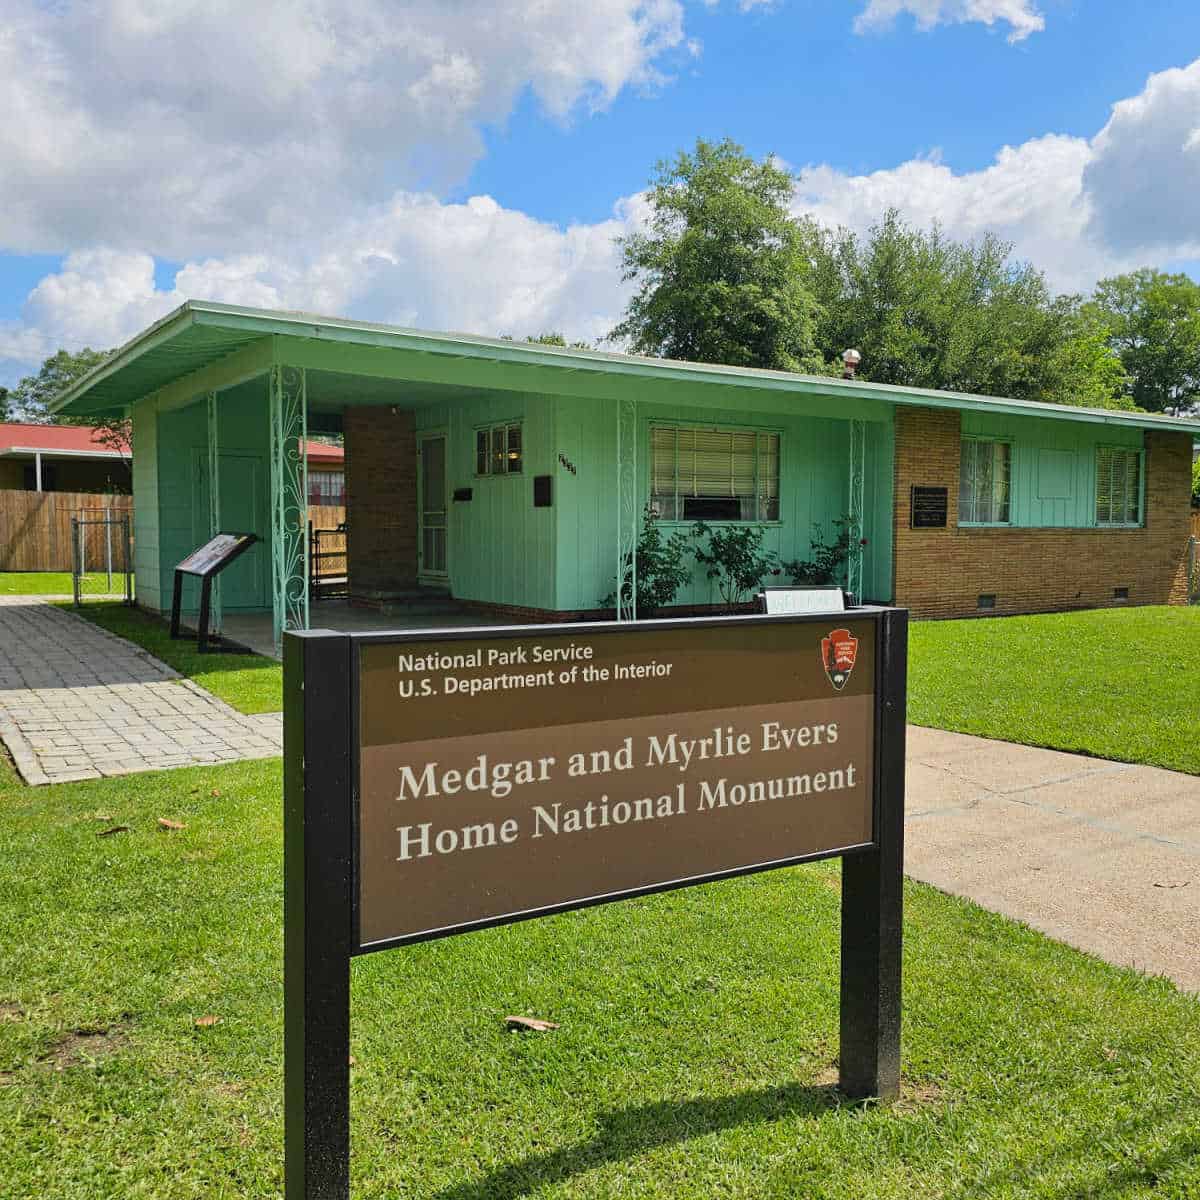 Medgar and Myrlie Evers Home National Monument sign in front of a green single story house